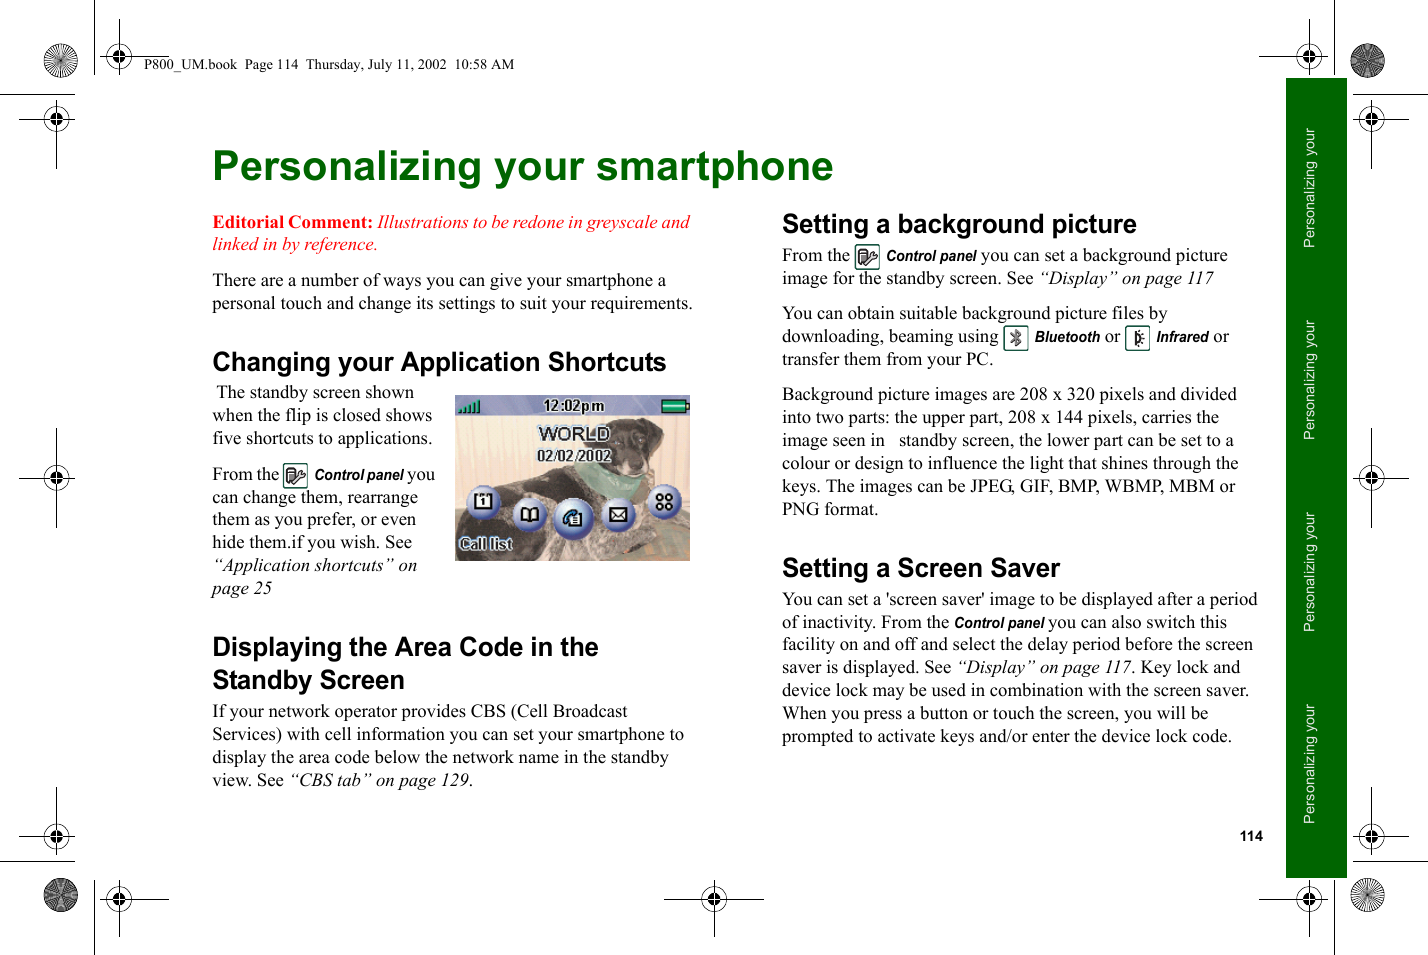 114Personalizing your Personalizing your Personalizing your Personalizing your Personalizing your smartphoneEditorial Comment: Illustrations to be redone in greyscale and linked in by reference.There are a number of ways you can give your smartphone a personal touch and change its settings to suit your requirements.Changing your Application Shortcuts The standby screen shown when the flip is closed shows five shortcuts to applications.From the Control panel you can change them, rearrange them as you prefer, or even hide them.if you wish. See “Application shortcuts” on page 25Displaying the Area Code in the Standby ScreenIf your network operator provides CBS (Cell Broadcast Services) with cell information you can set your smartphone to display the area code below the network name in the standby view. See “CBS tab” on page 129.Setting a background pictureFrom the Control panel you can set a background picture image for the standby screen. See “Display” on page 117 You can obtain suitable background picture files by downloading, beaming using Bluetooth or Infrared or transfer them from your PC.Background picture images are 208 x 320 pixels and divided into two parts: the upper part, 208 x 144 pixels, carries the image seen in   standby screen, the lower part can be set to a colour or design to influence the light that shines through the keys. The images can be JPEG, GIF, BMP, WBMP, MBM or PNG format.Setting a Screen SaverYou can set a &apos;screen saver&apos; image to be displayed after a period of inactivity. From the Control panel you can also switch this facility on and off and select the delay period before the screen saver is displayed. See “Display” on page 117. Key lock and device lock may be used in combination with the screen saver. When you press a button or touch the screen, you will be prompted to activate keys and/or enter the device lock code.P800_UM.book  Page 114  Thursday, July 11, 2002  10:58 AM